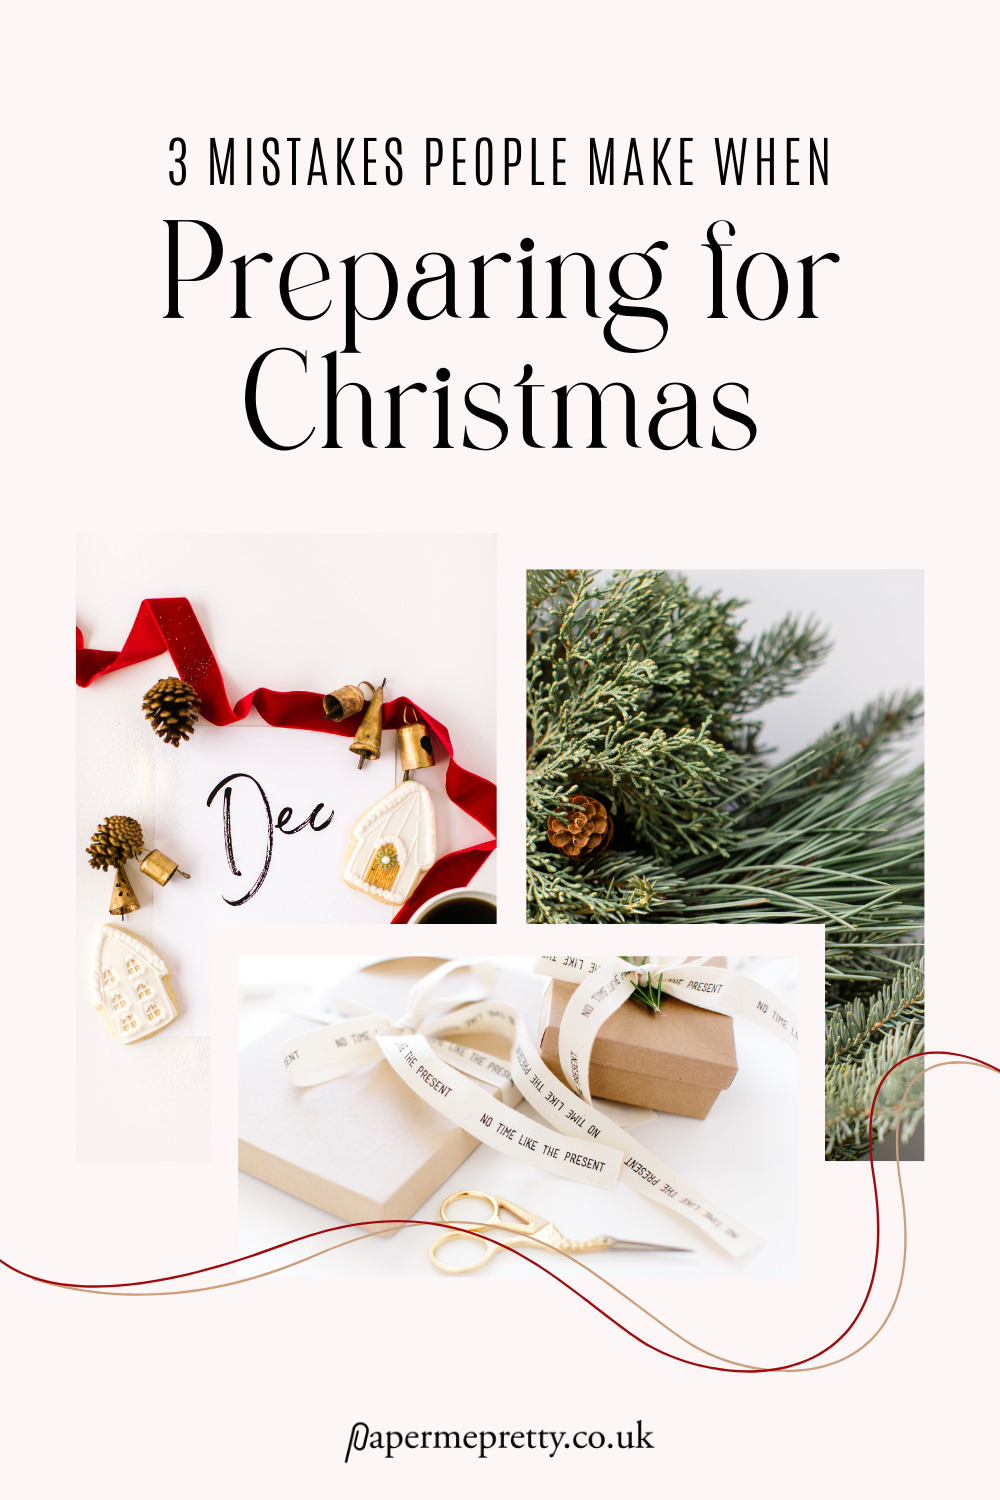 Don't make the 3 mistakes people often make when it comes to planning. Get our Ultimate Christmas Planner and get ahead of the game with our 14-week runway! #ChristmasPlanning #ChristmasPreparations #UltimateChristmasPlanner